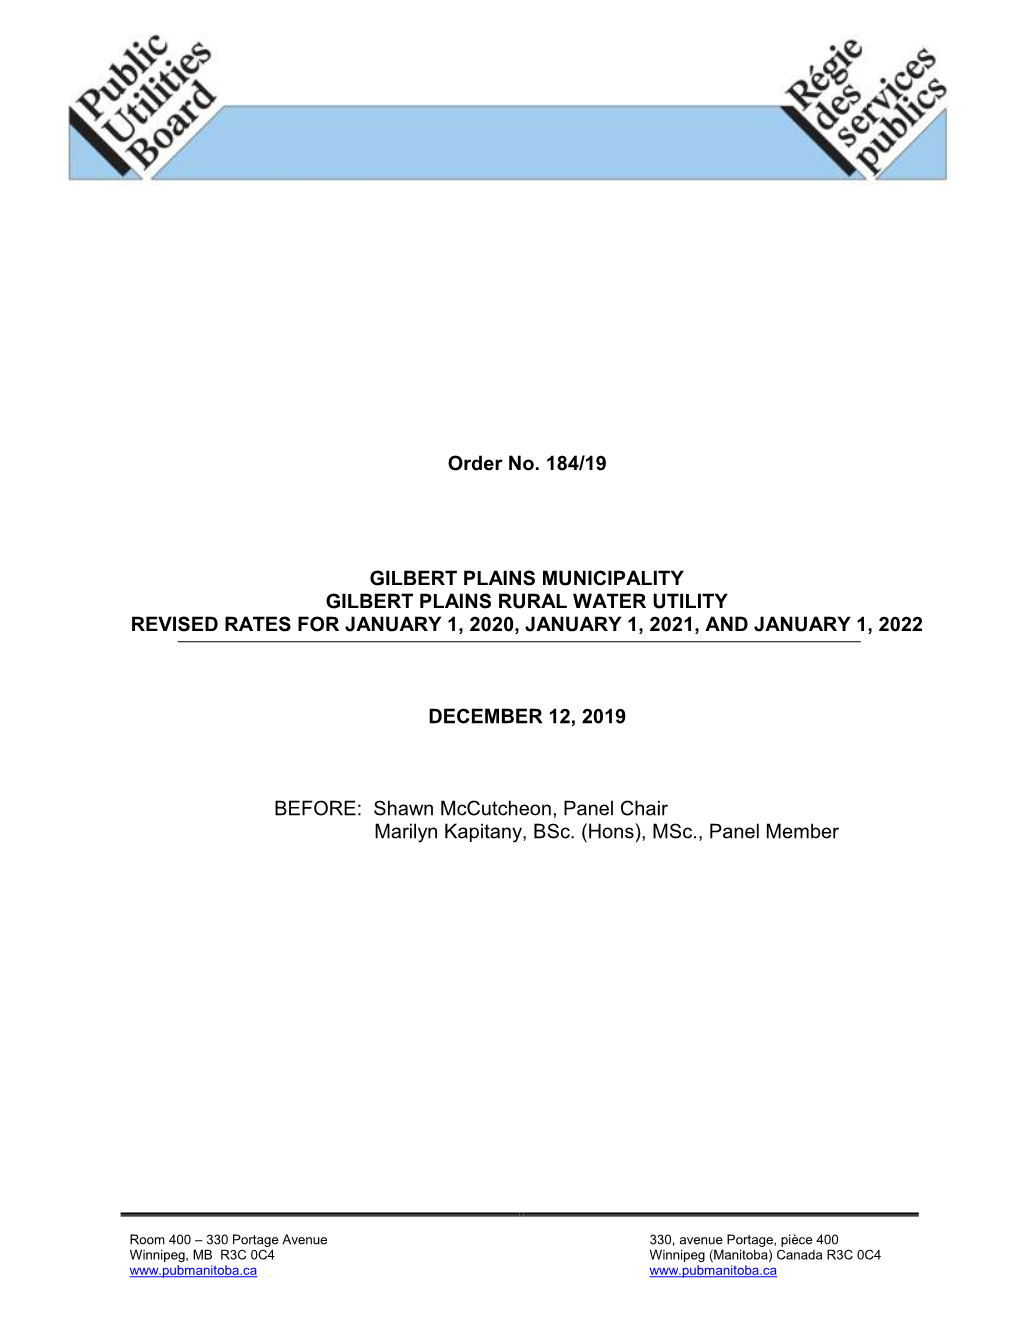 Order No. 184/19 GILBERT PLAINS MUNICIPALITY GILBERT PLAINS RURAL WATER UTILITY REVISED RATES for JANUARY 1, 2020, JANUARY 1, 20